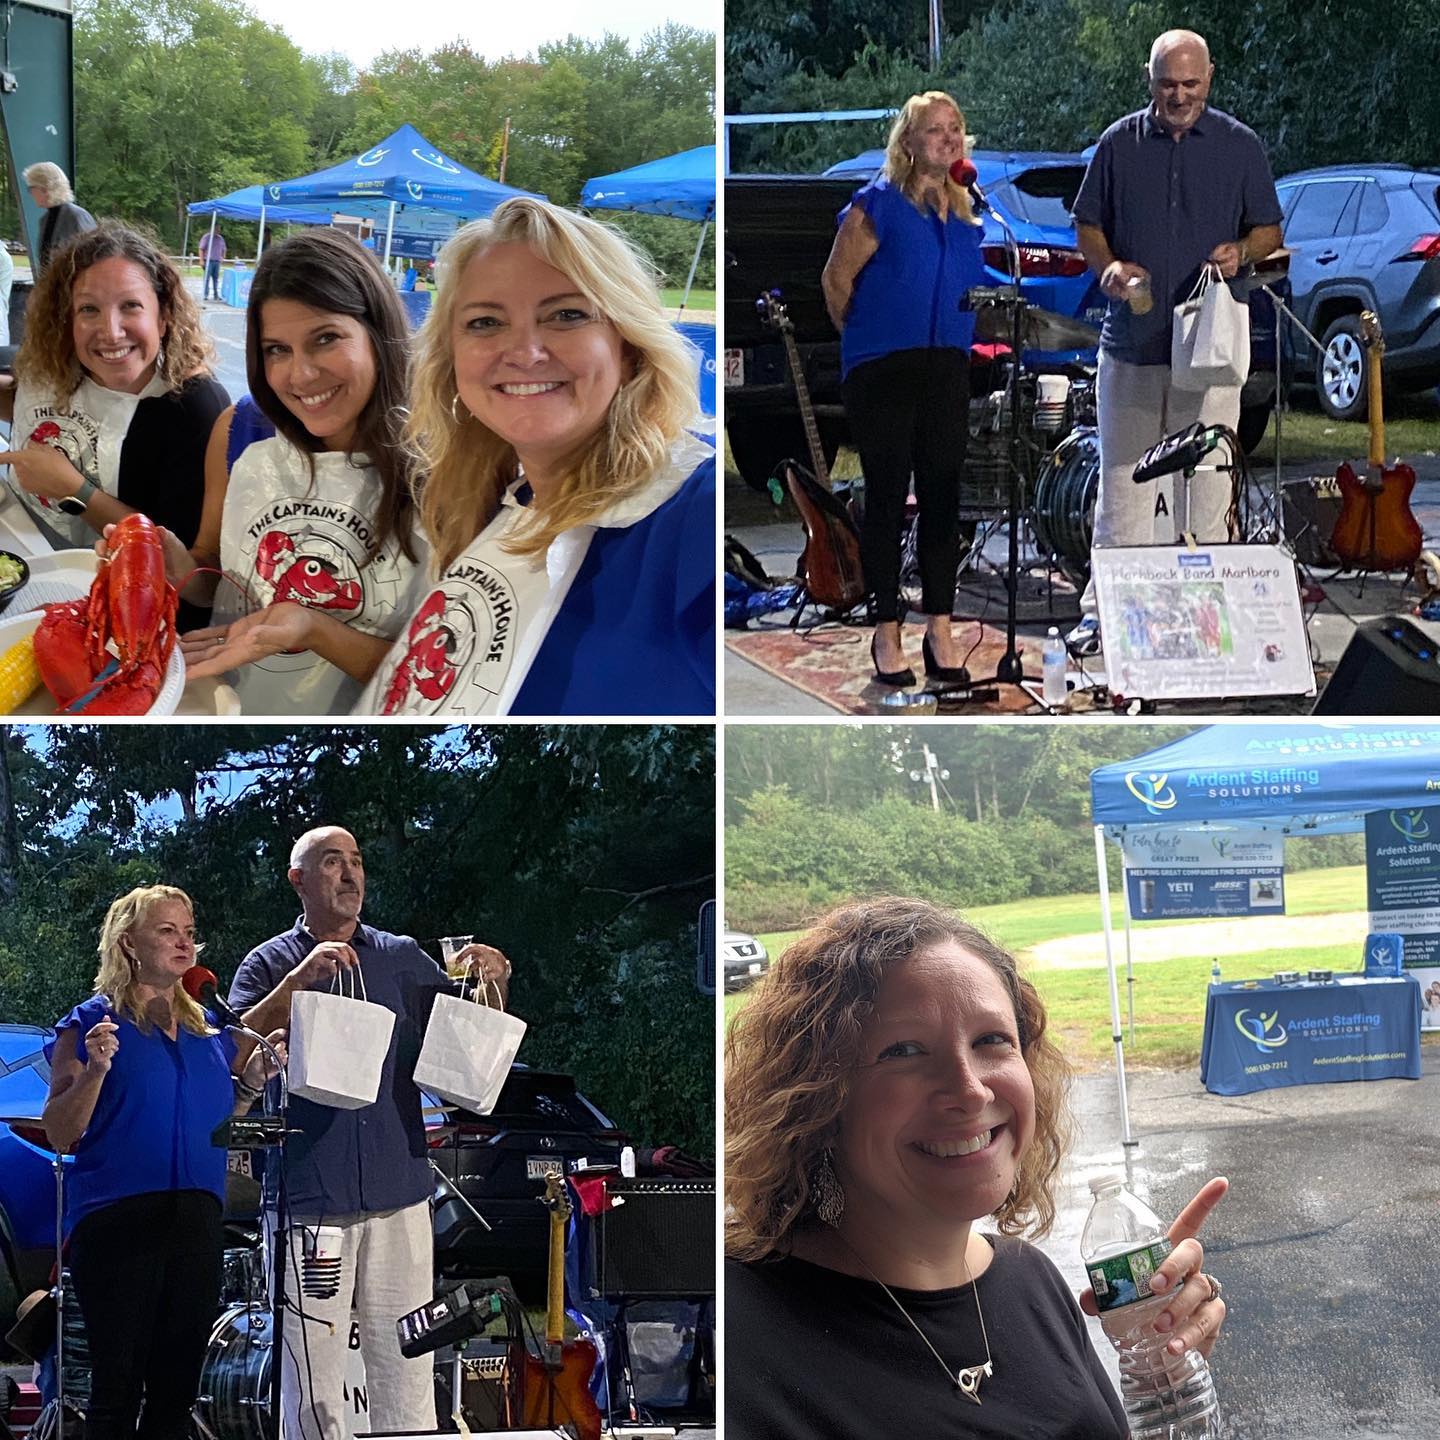 The @ardentstaffing team had a wonderful night eating 🦞&🥩 at the Marlborough Regional Chamber of Commerce Lobster and Steak Festival.  Congratulations to Lucy Servidio from Capaccio Environmental Engineering and Sheldon Prenovitz from Connect Pay for winning the @bose Frames! 🕶 Enjoy